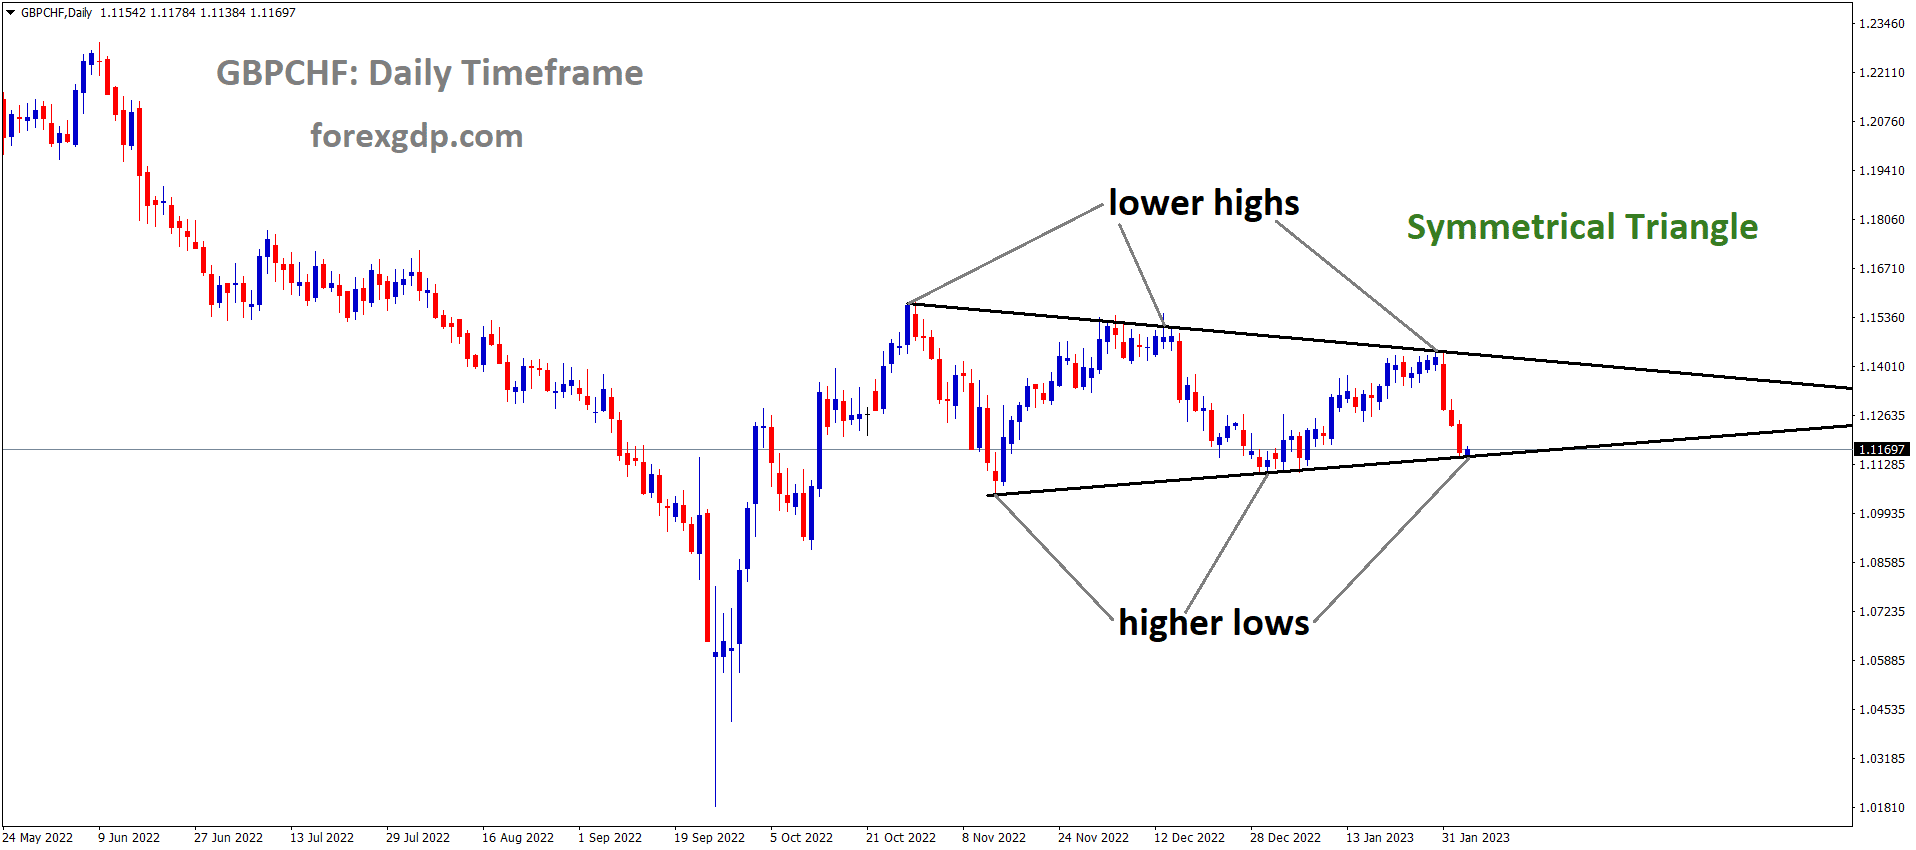 GBPCHF is moving in the Symmetrical triangle pattern and the market has reached the bottom area of the pattern